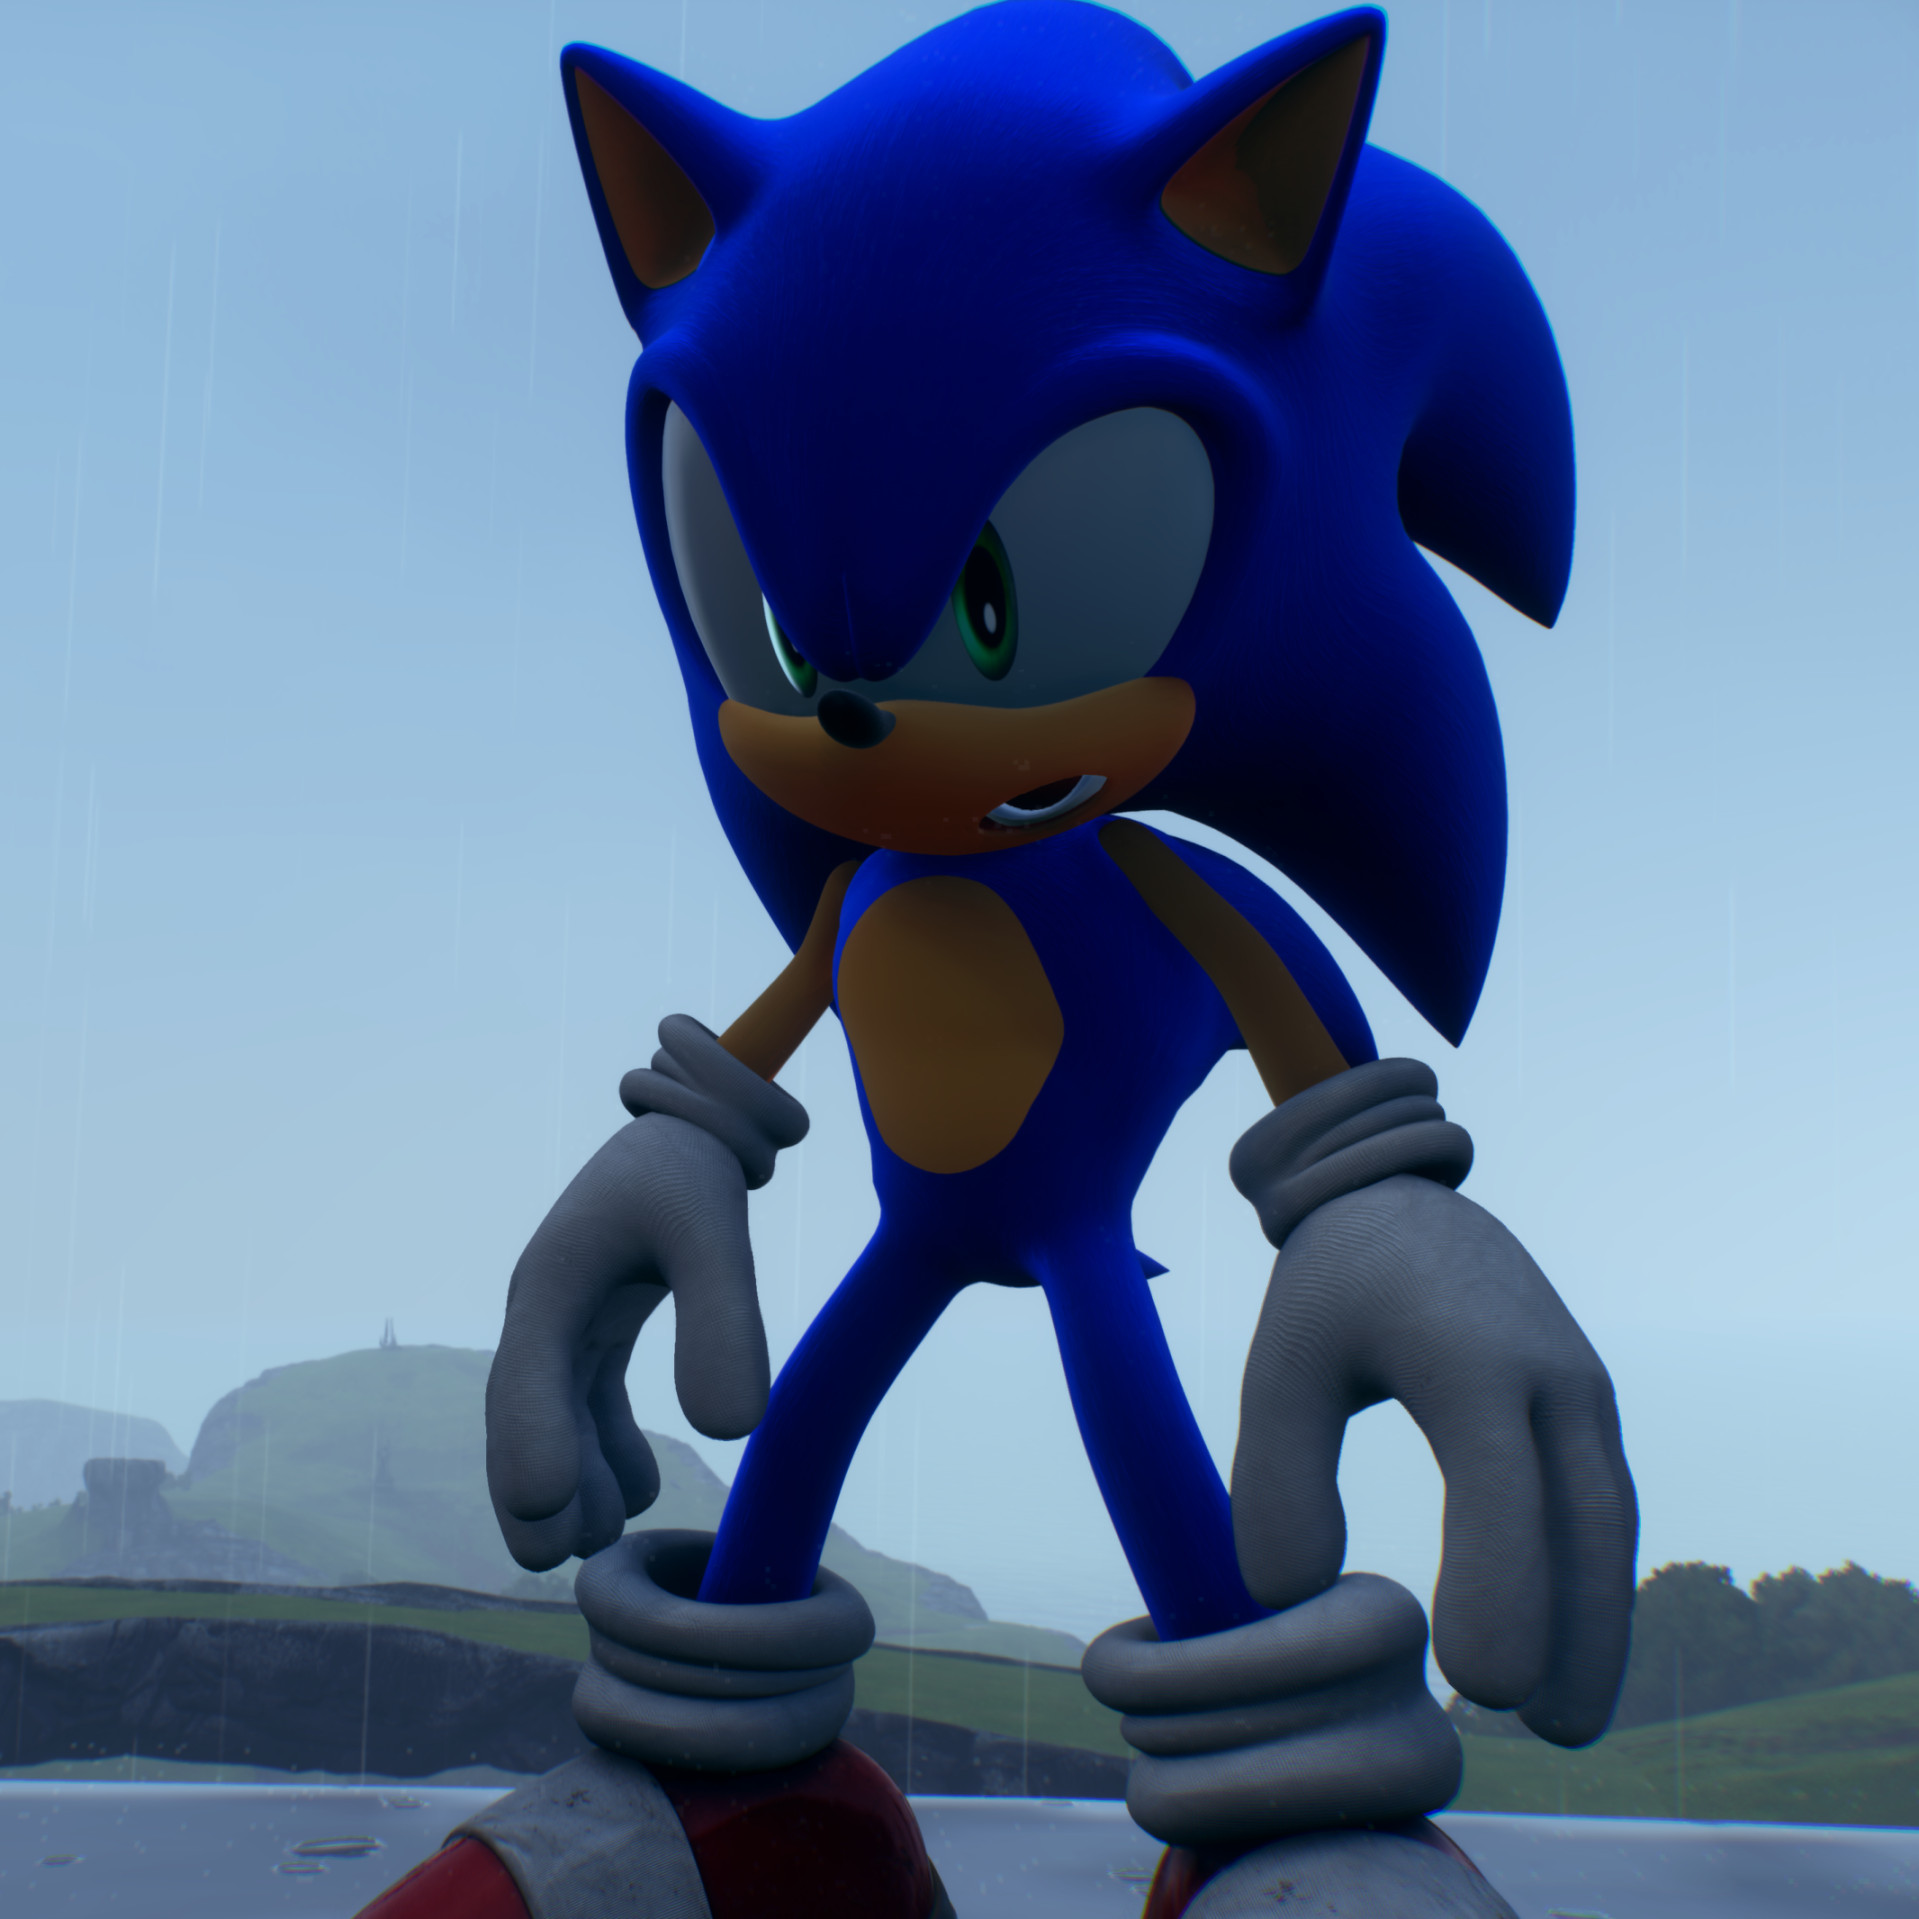 harley ♡ on X: the best sonic frontiers mod!!!!! look how cute